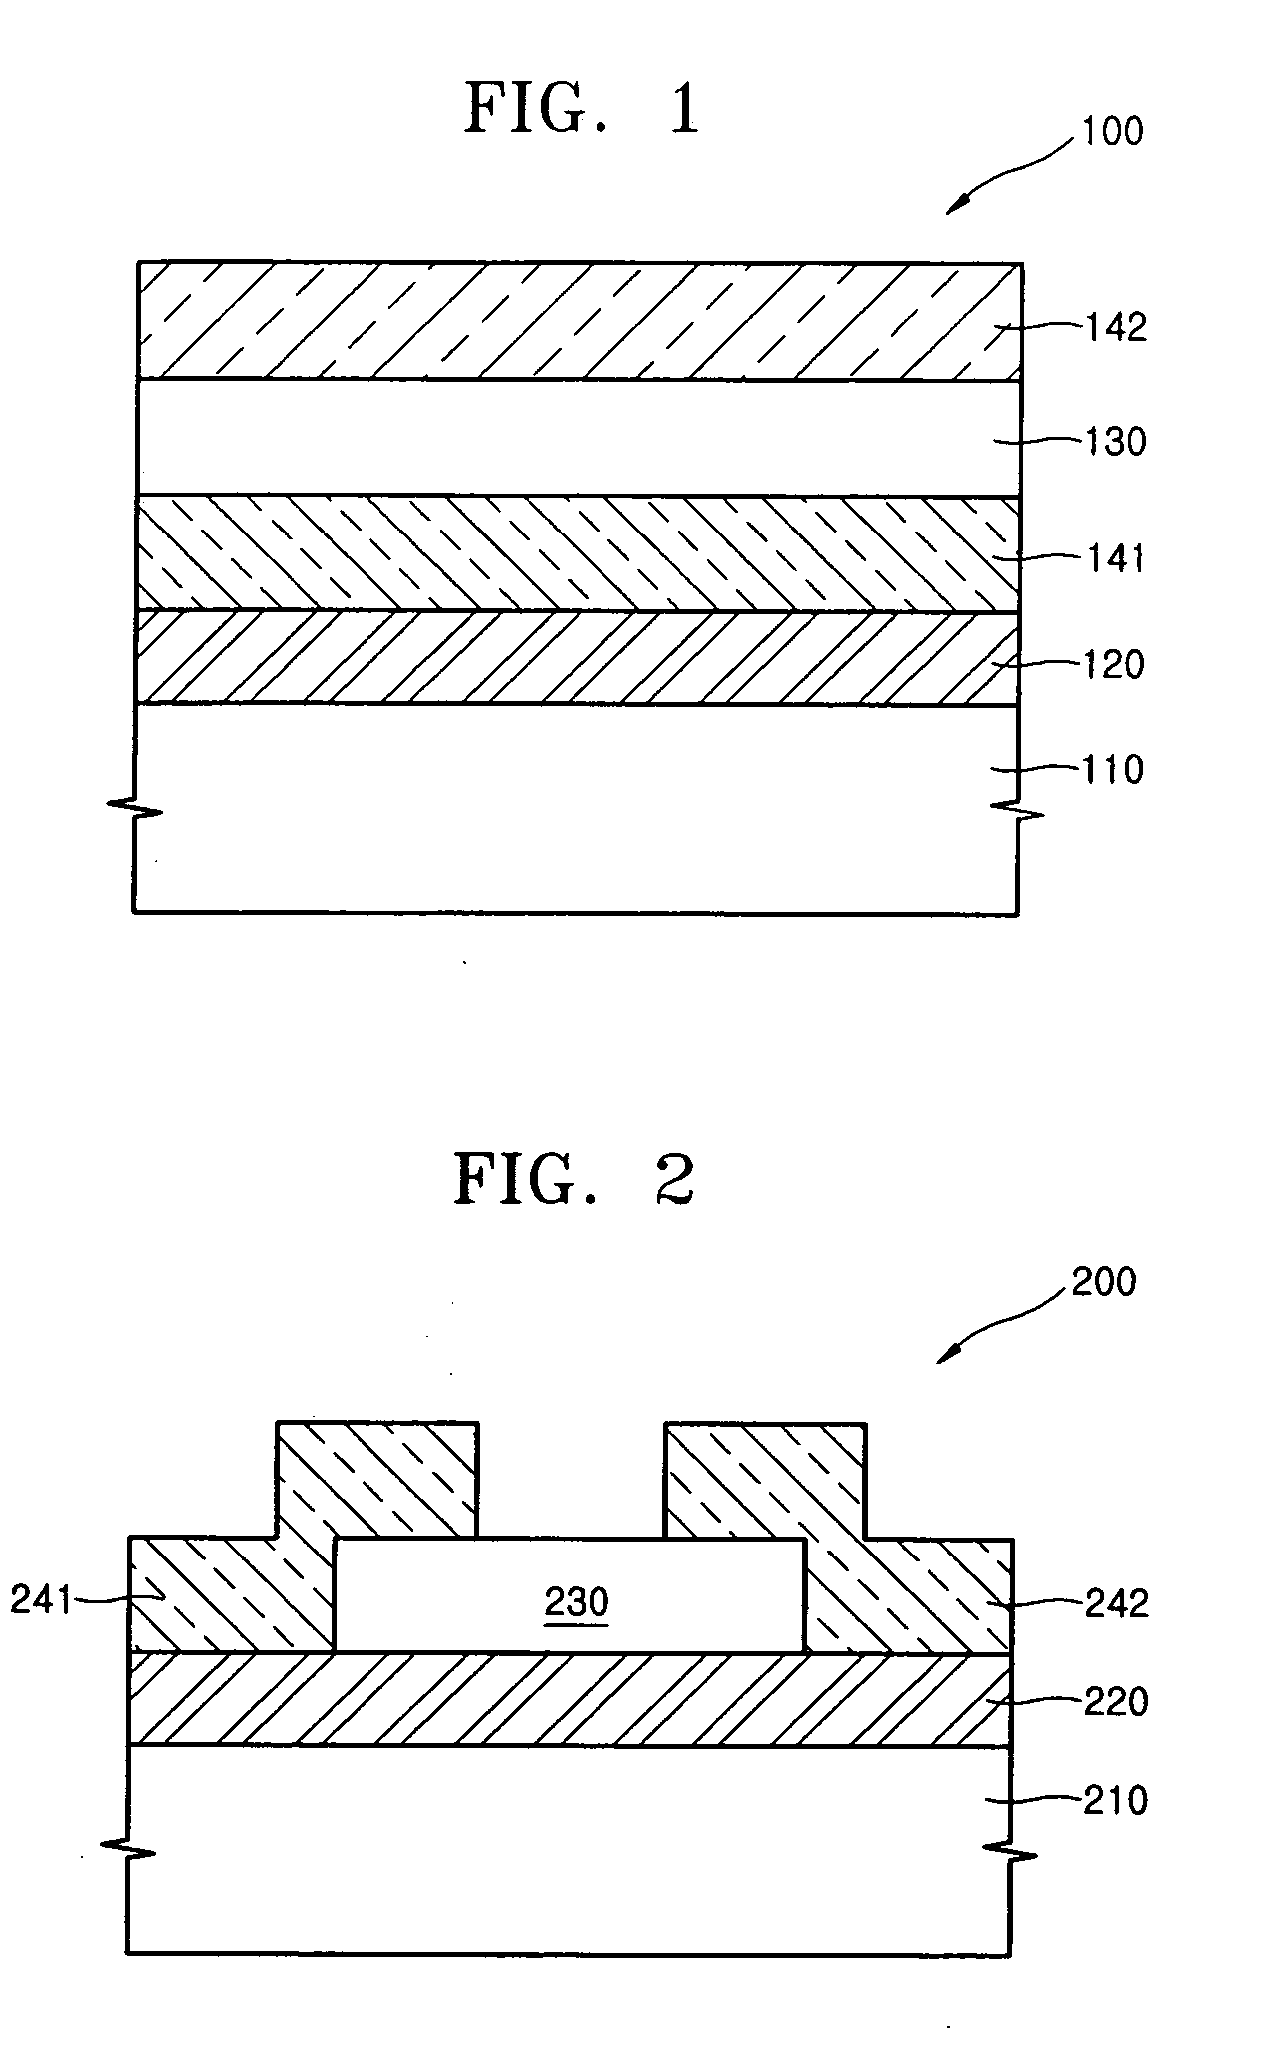 2-Terminal semiconductor device using abrupt metal-insulator transition semiconductor material